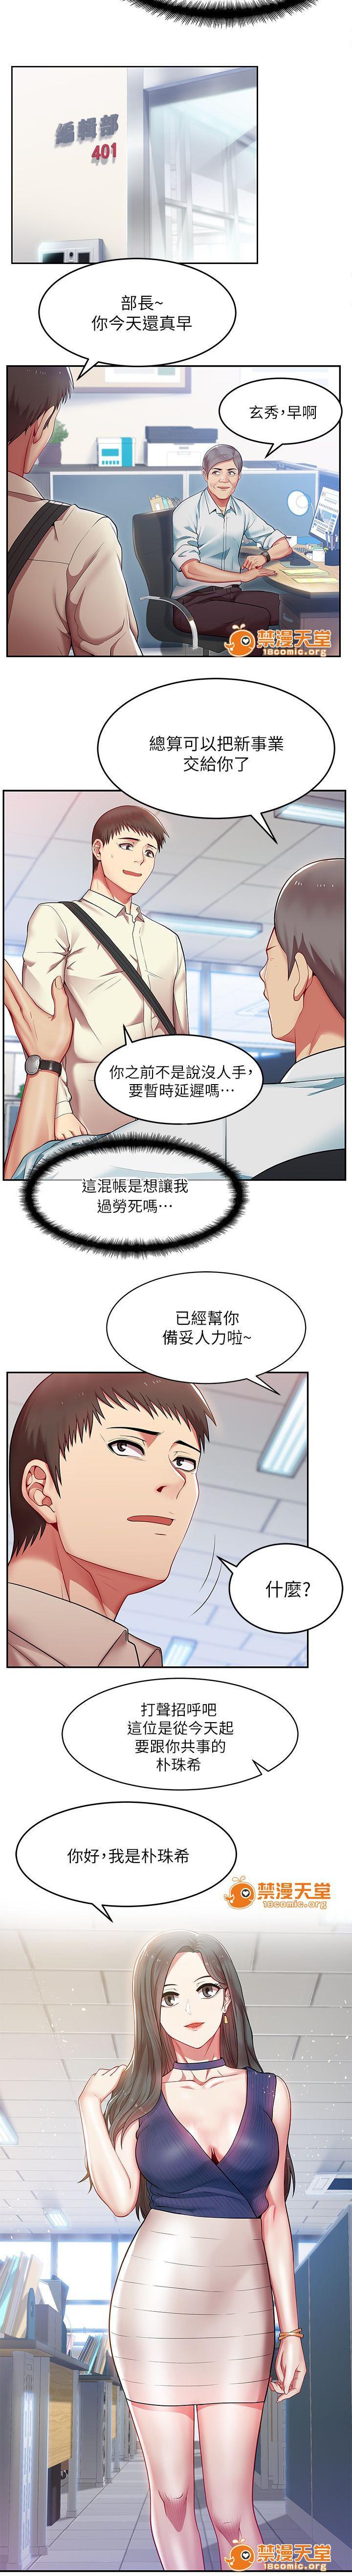 Prostitute 共事密友 1-27 Ass Licking - Page 4